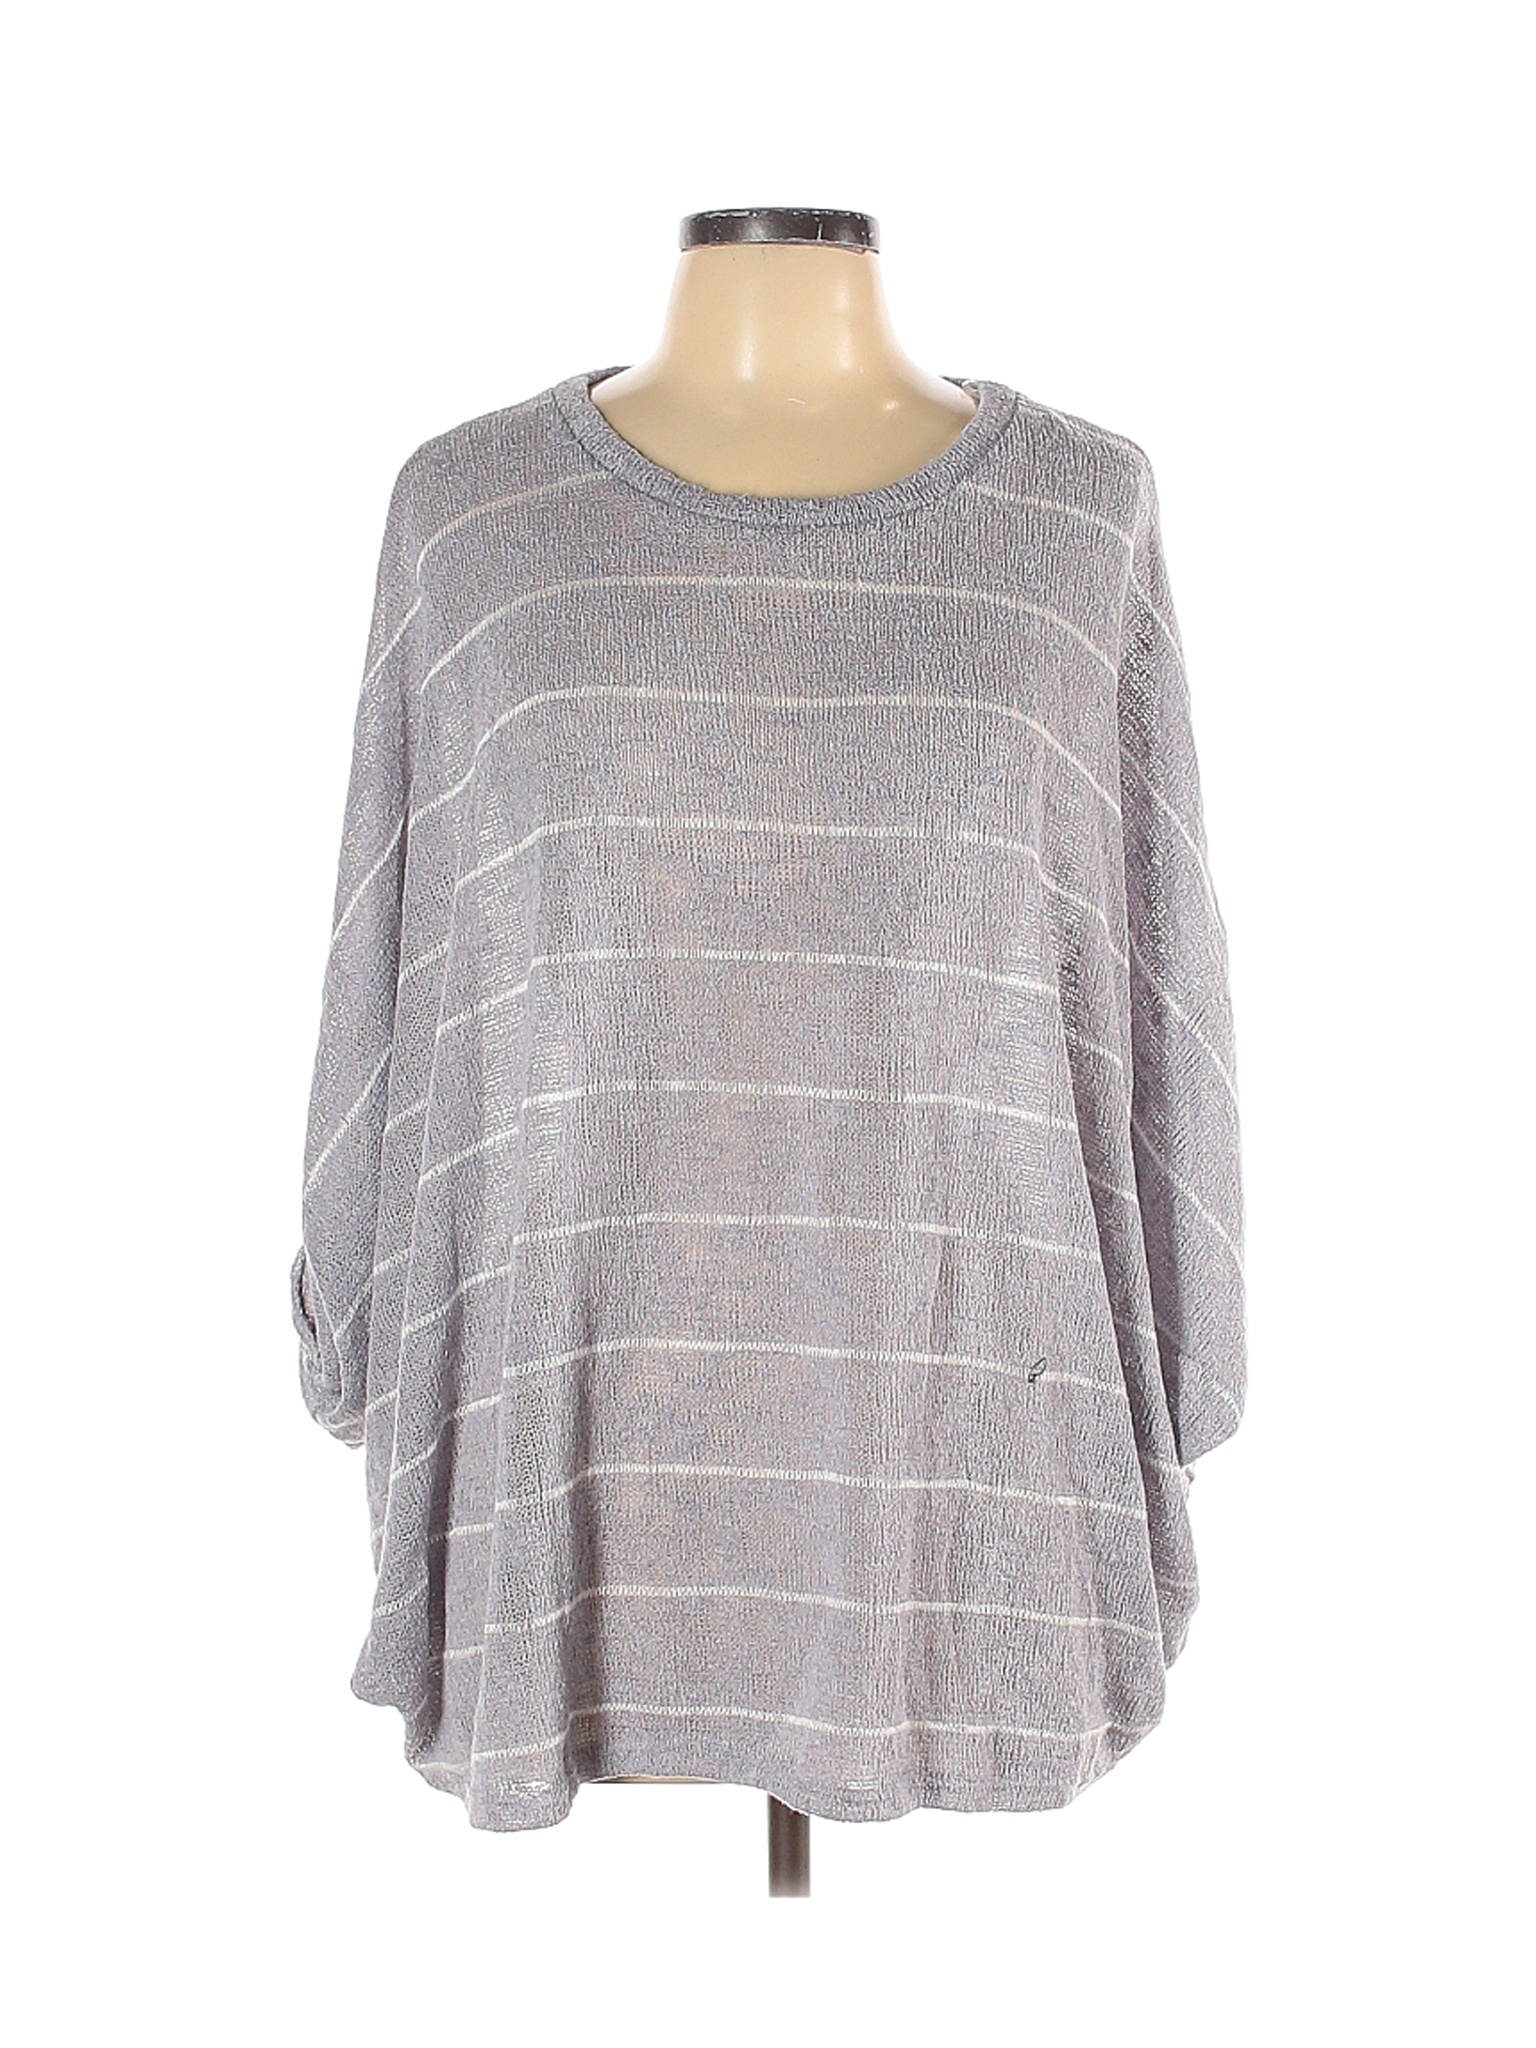 NWT Easel Women Gray Pullover Sweater L | eBay